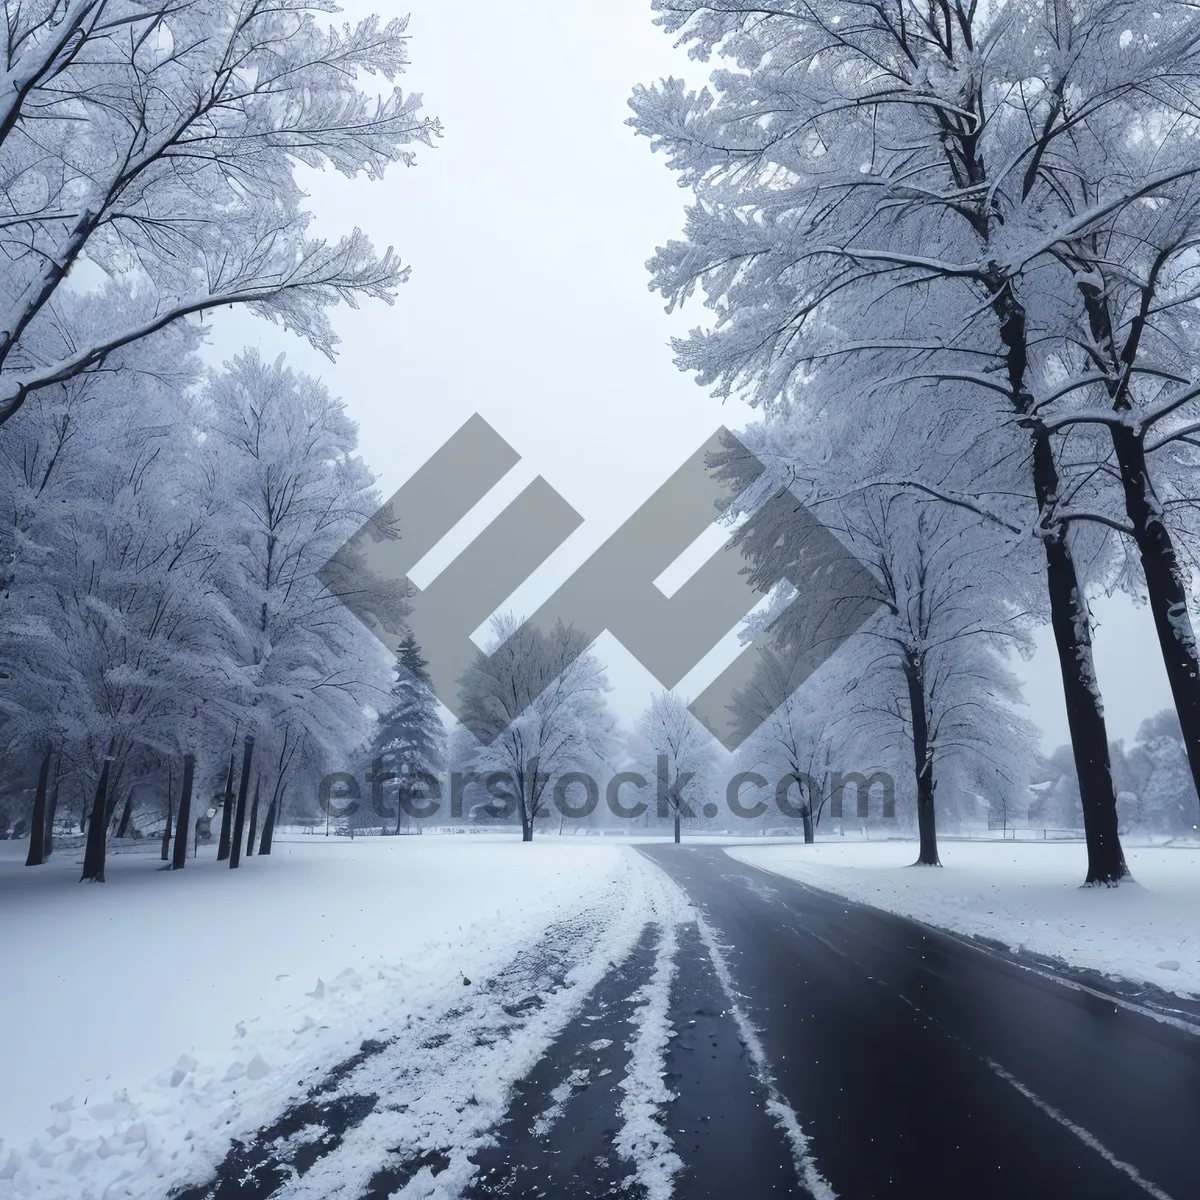 Picture of Winter Wonderland: Frozen Landscape with Snowy Trees